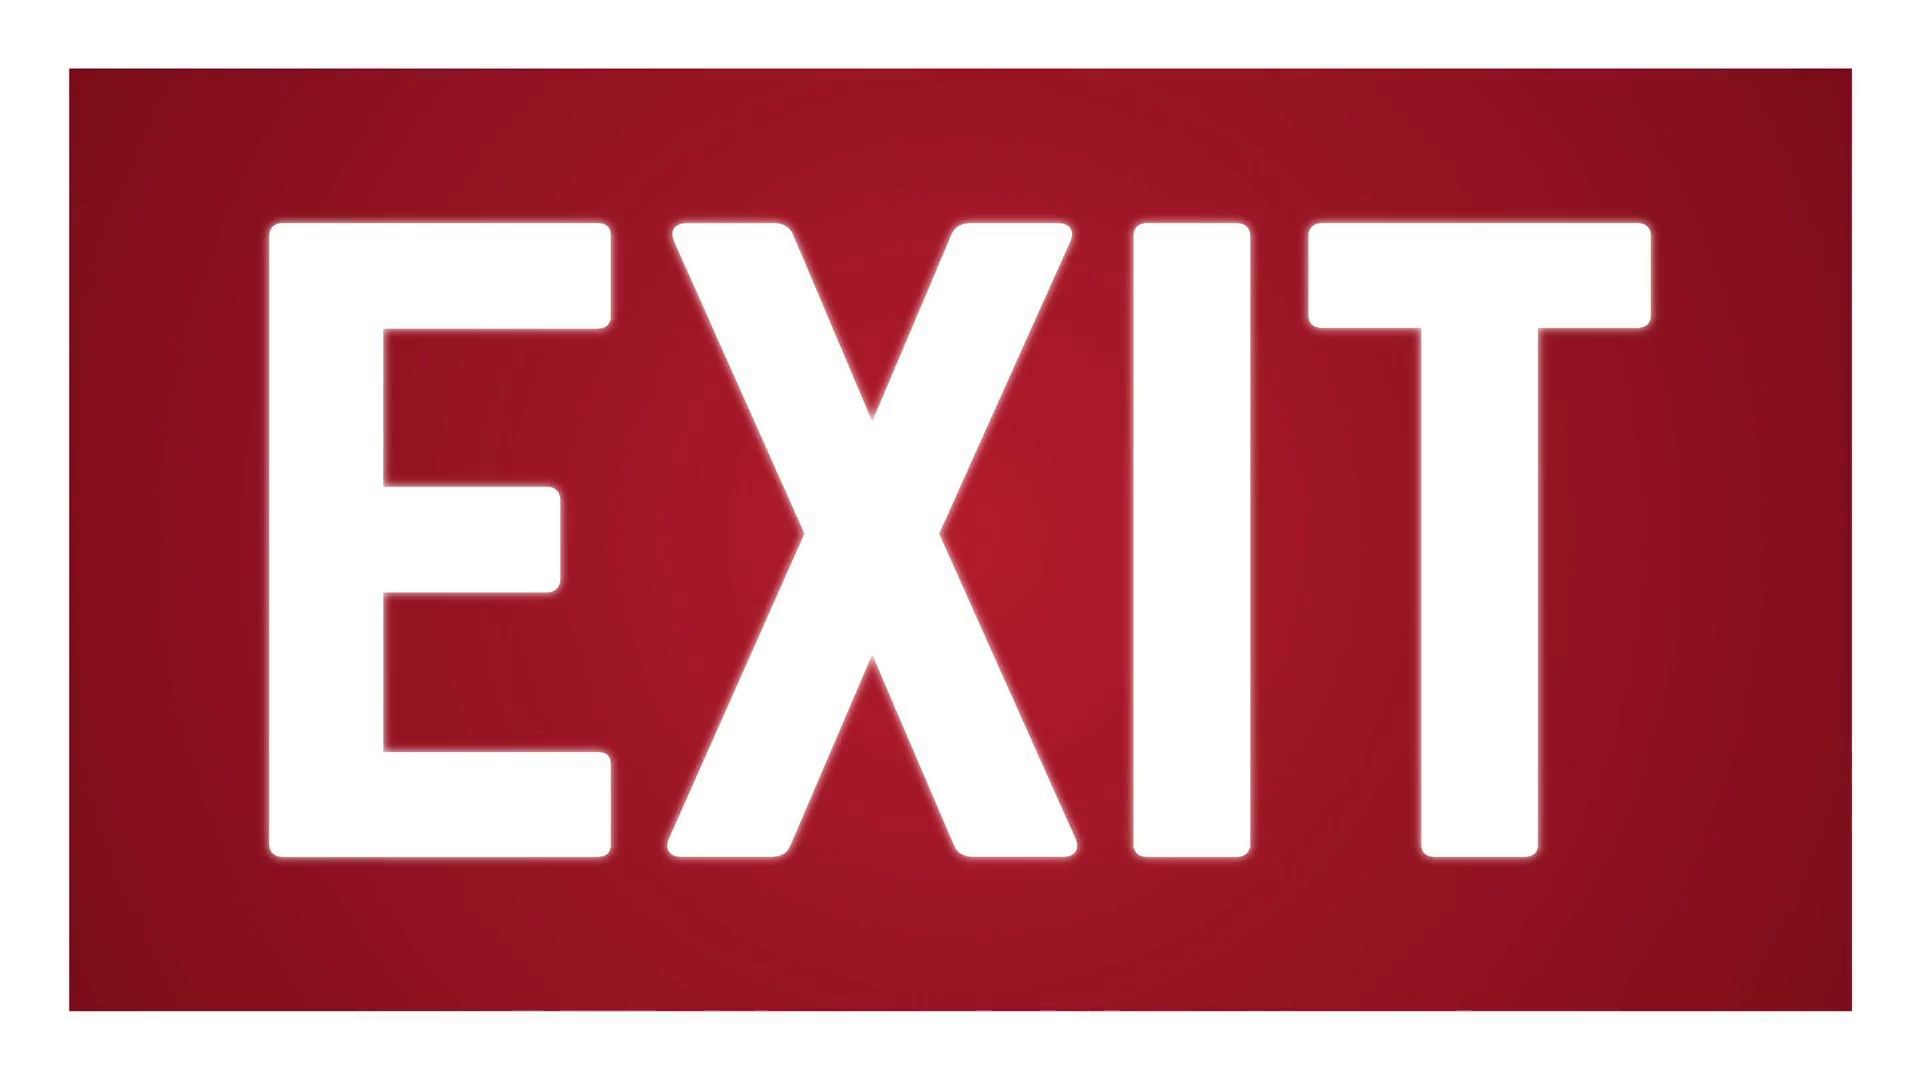 Red Exit icon sign flashing animation loop Motion Background ...